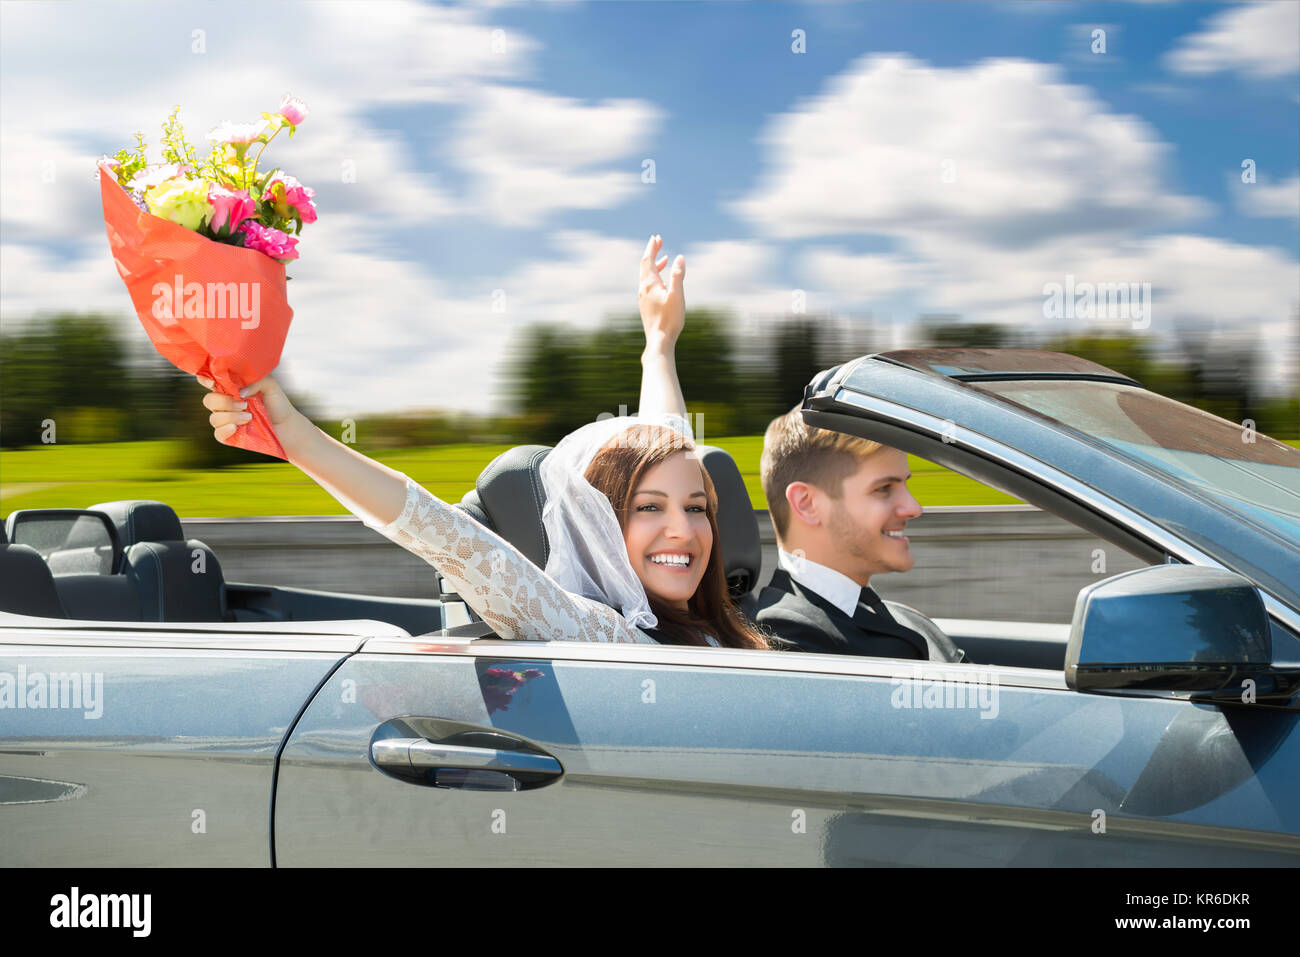 Just Married Car and Couple